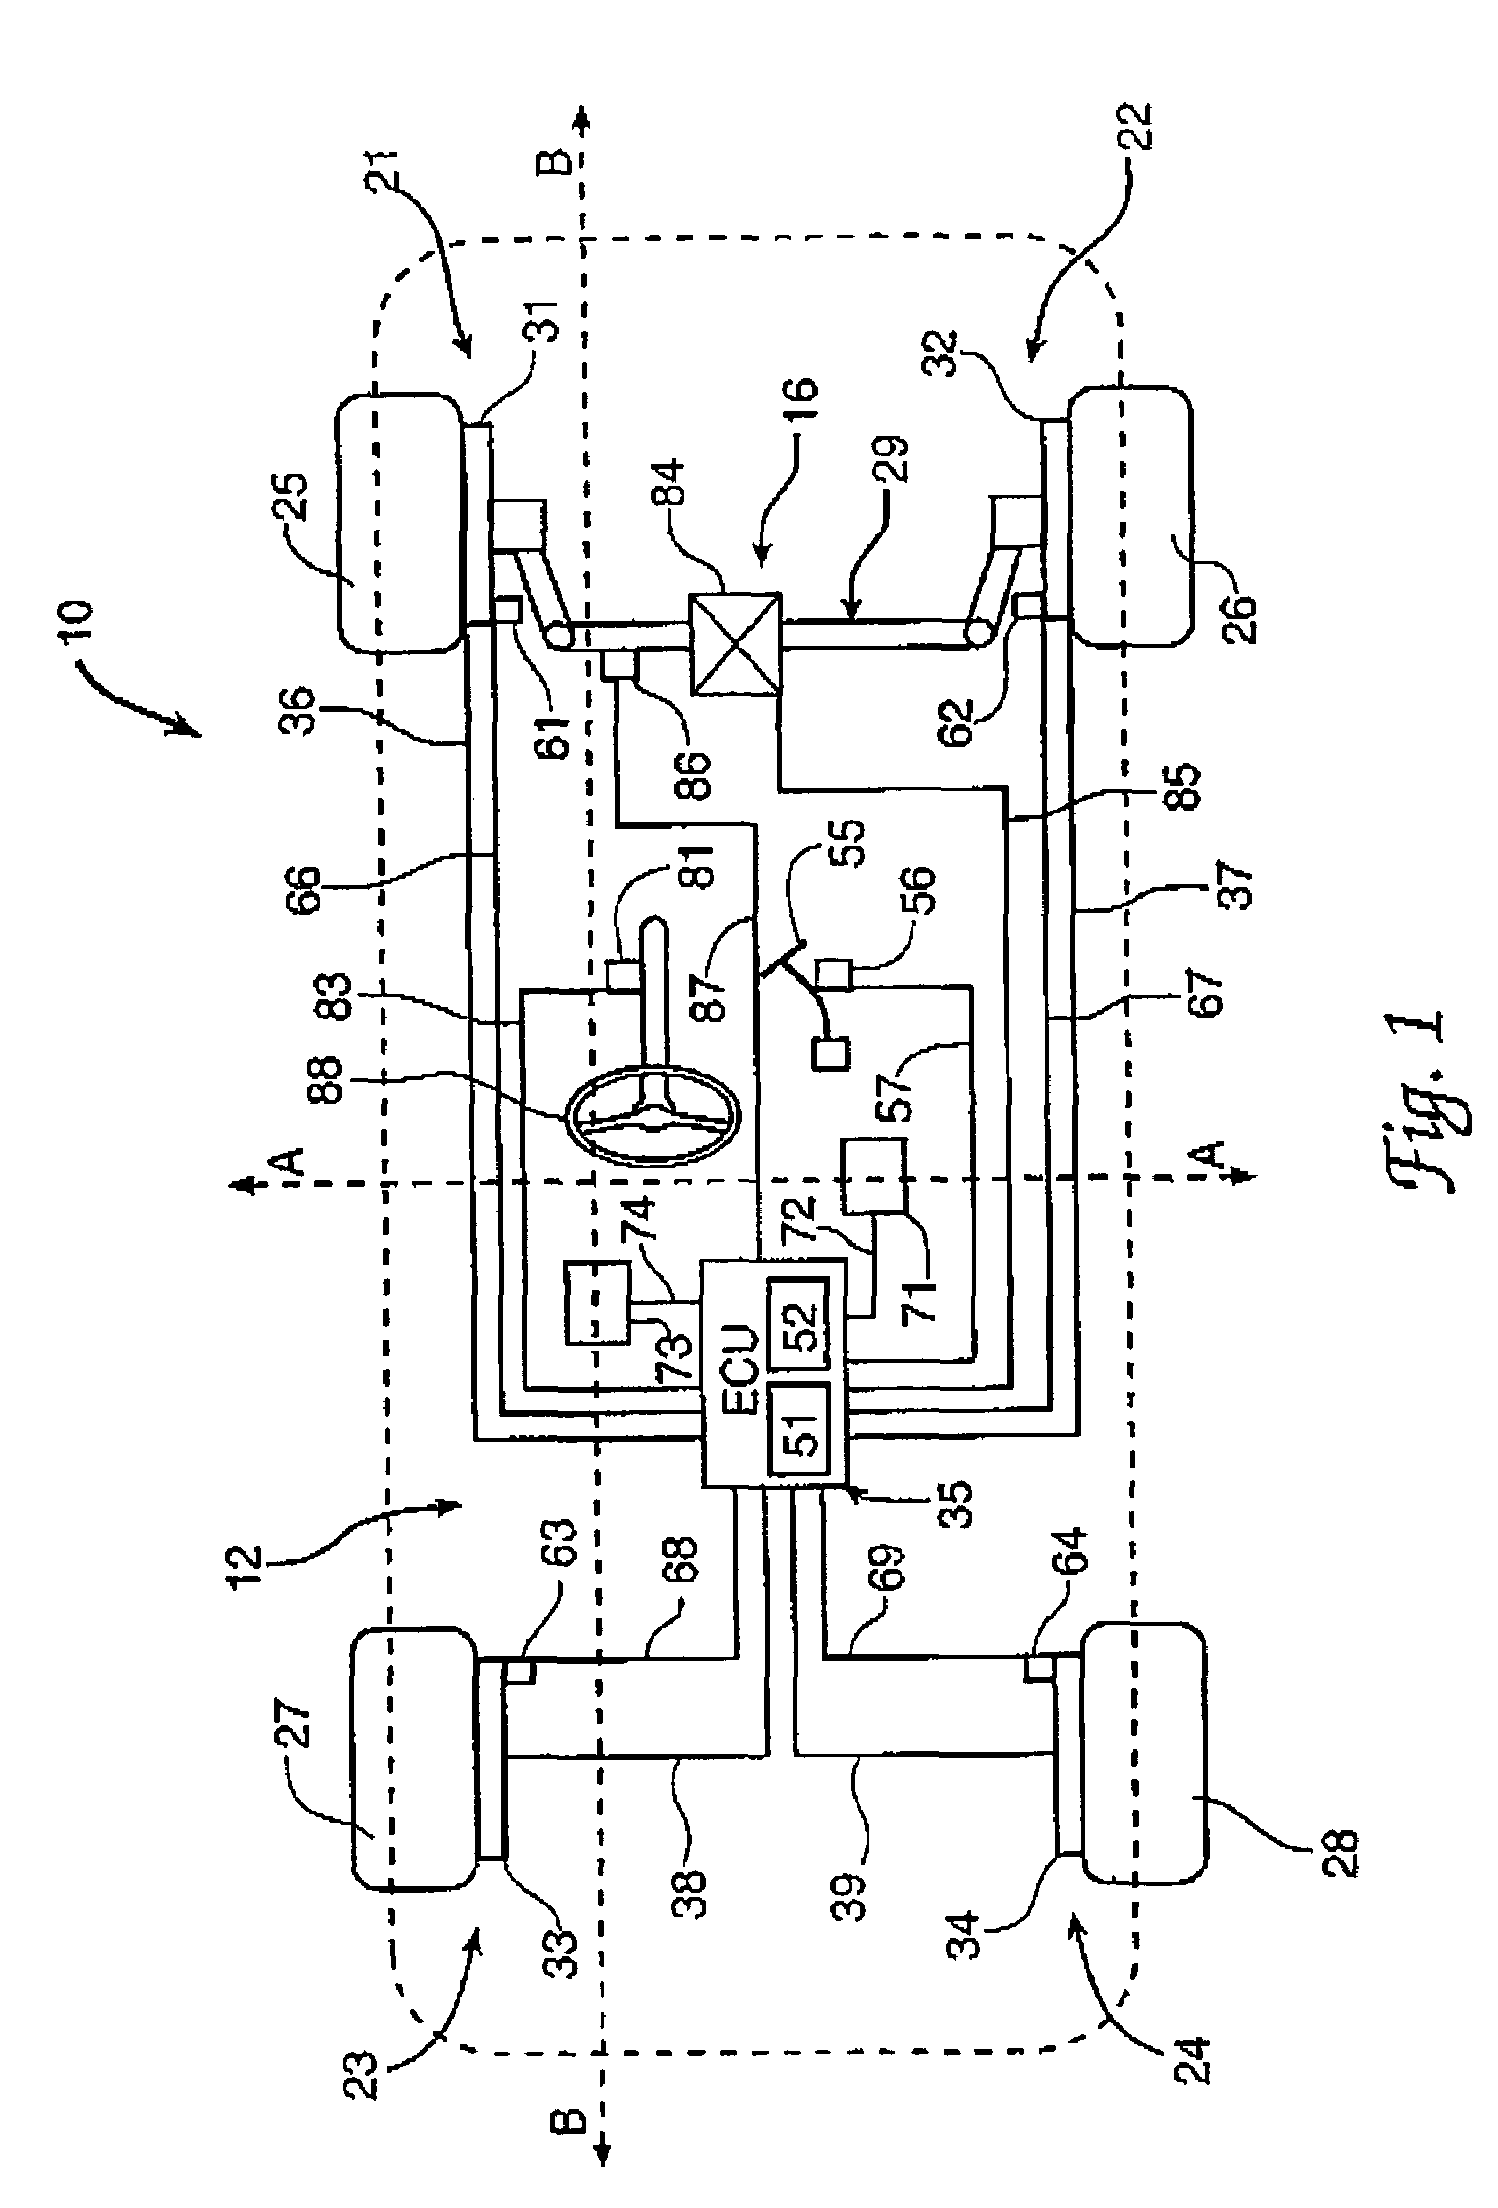 Integrated control of brake and steer by wire system using optimal control allocation methods